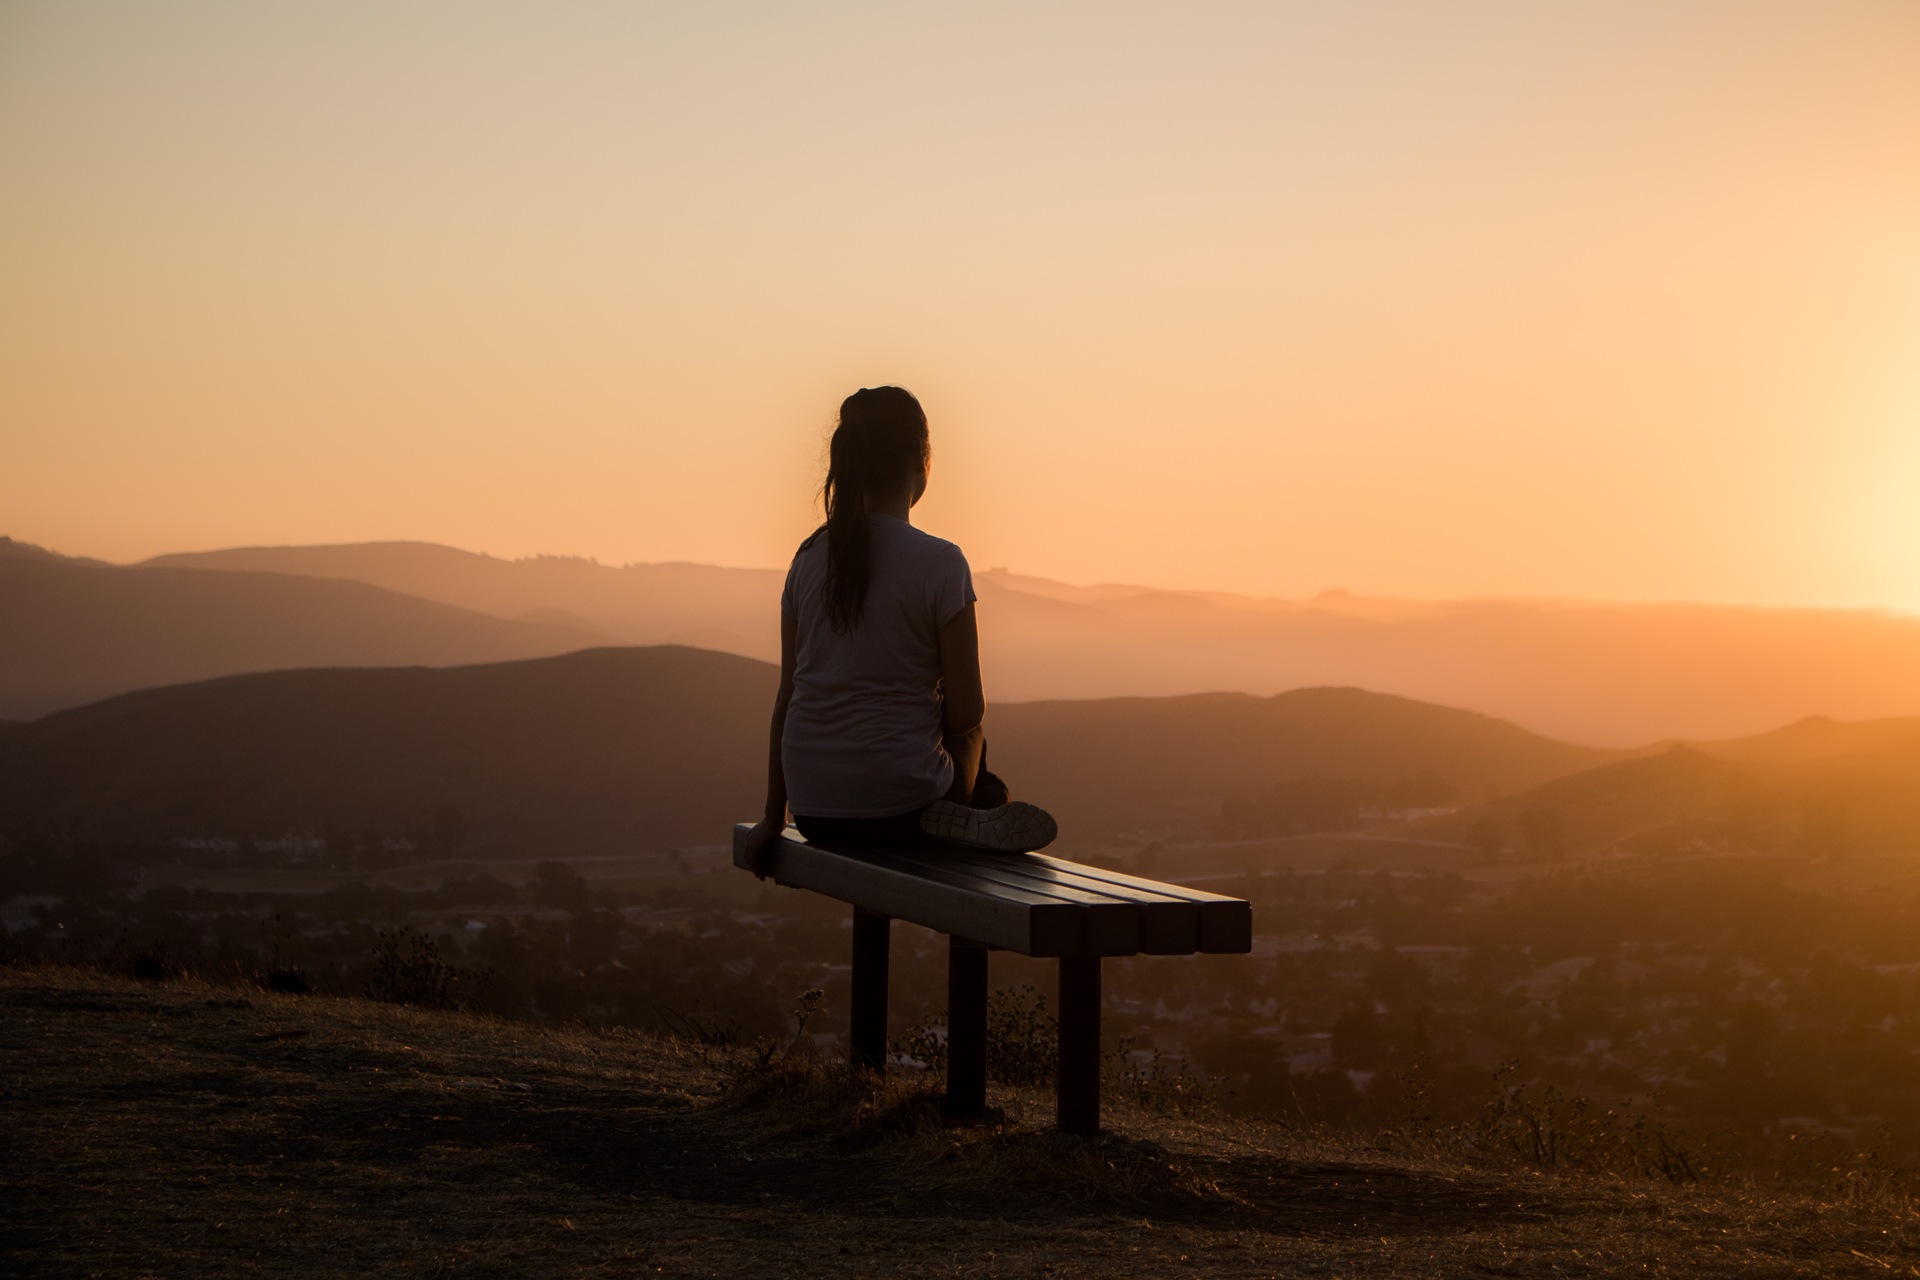 Girl looking at a sunset while sitting on a bench